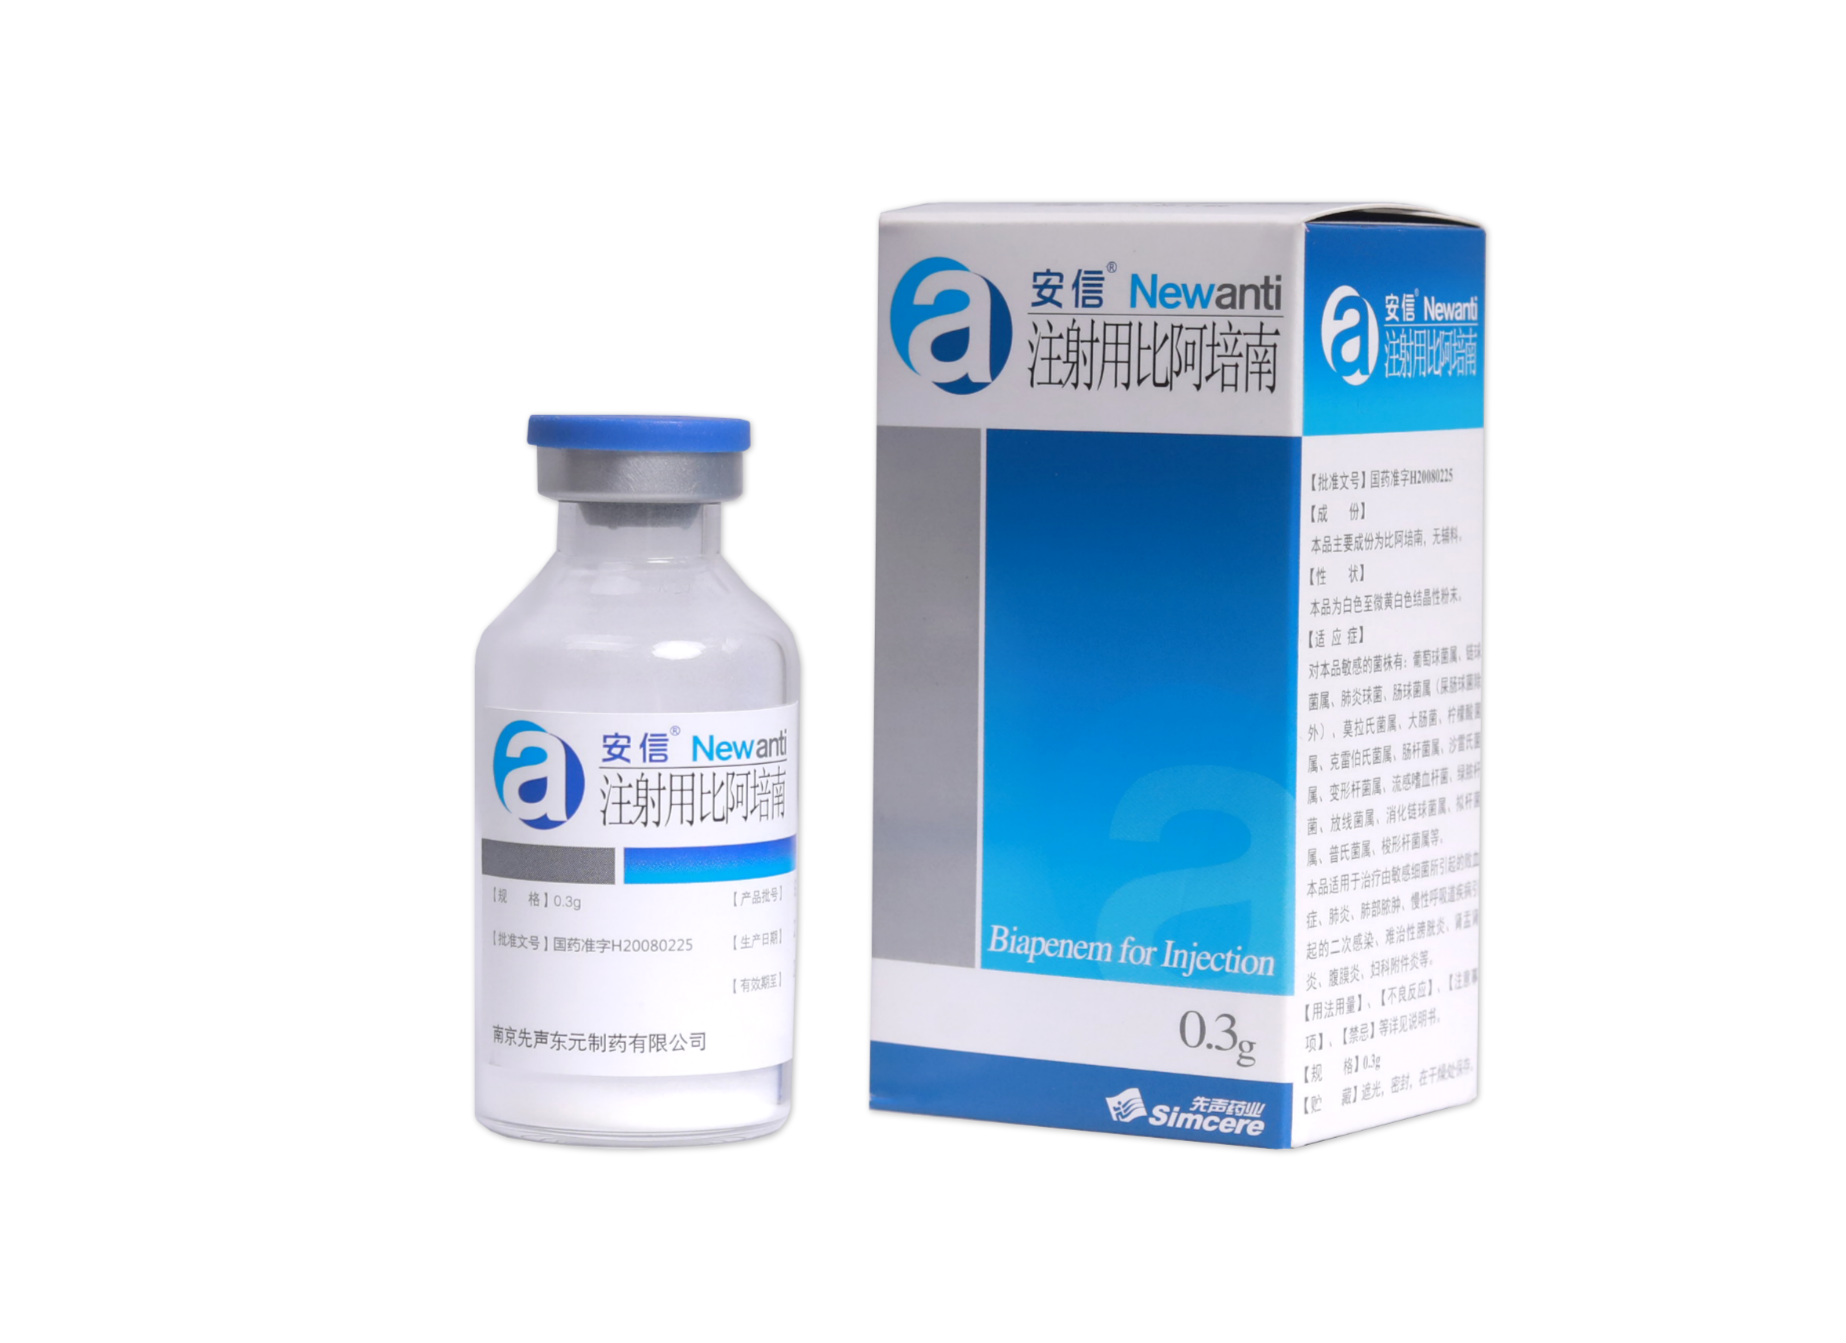 Newanti®：Biapenem for Injection